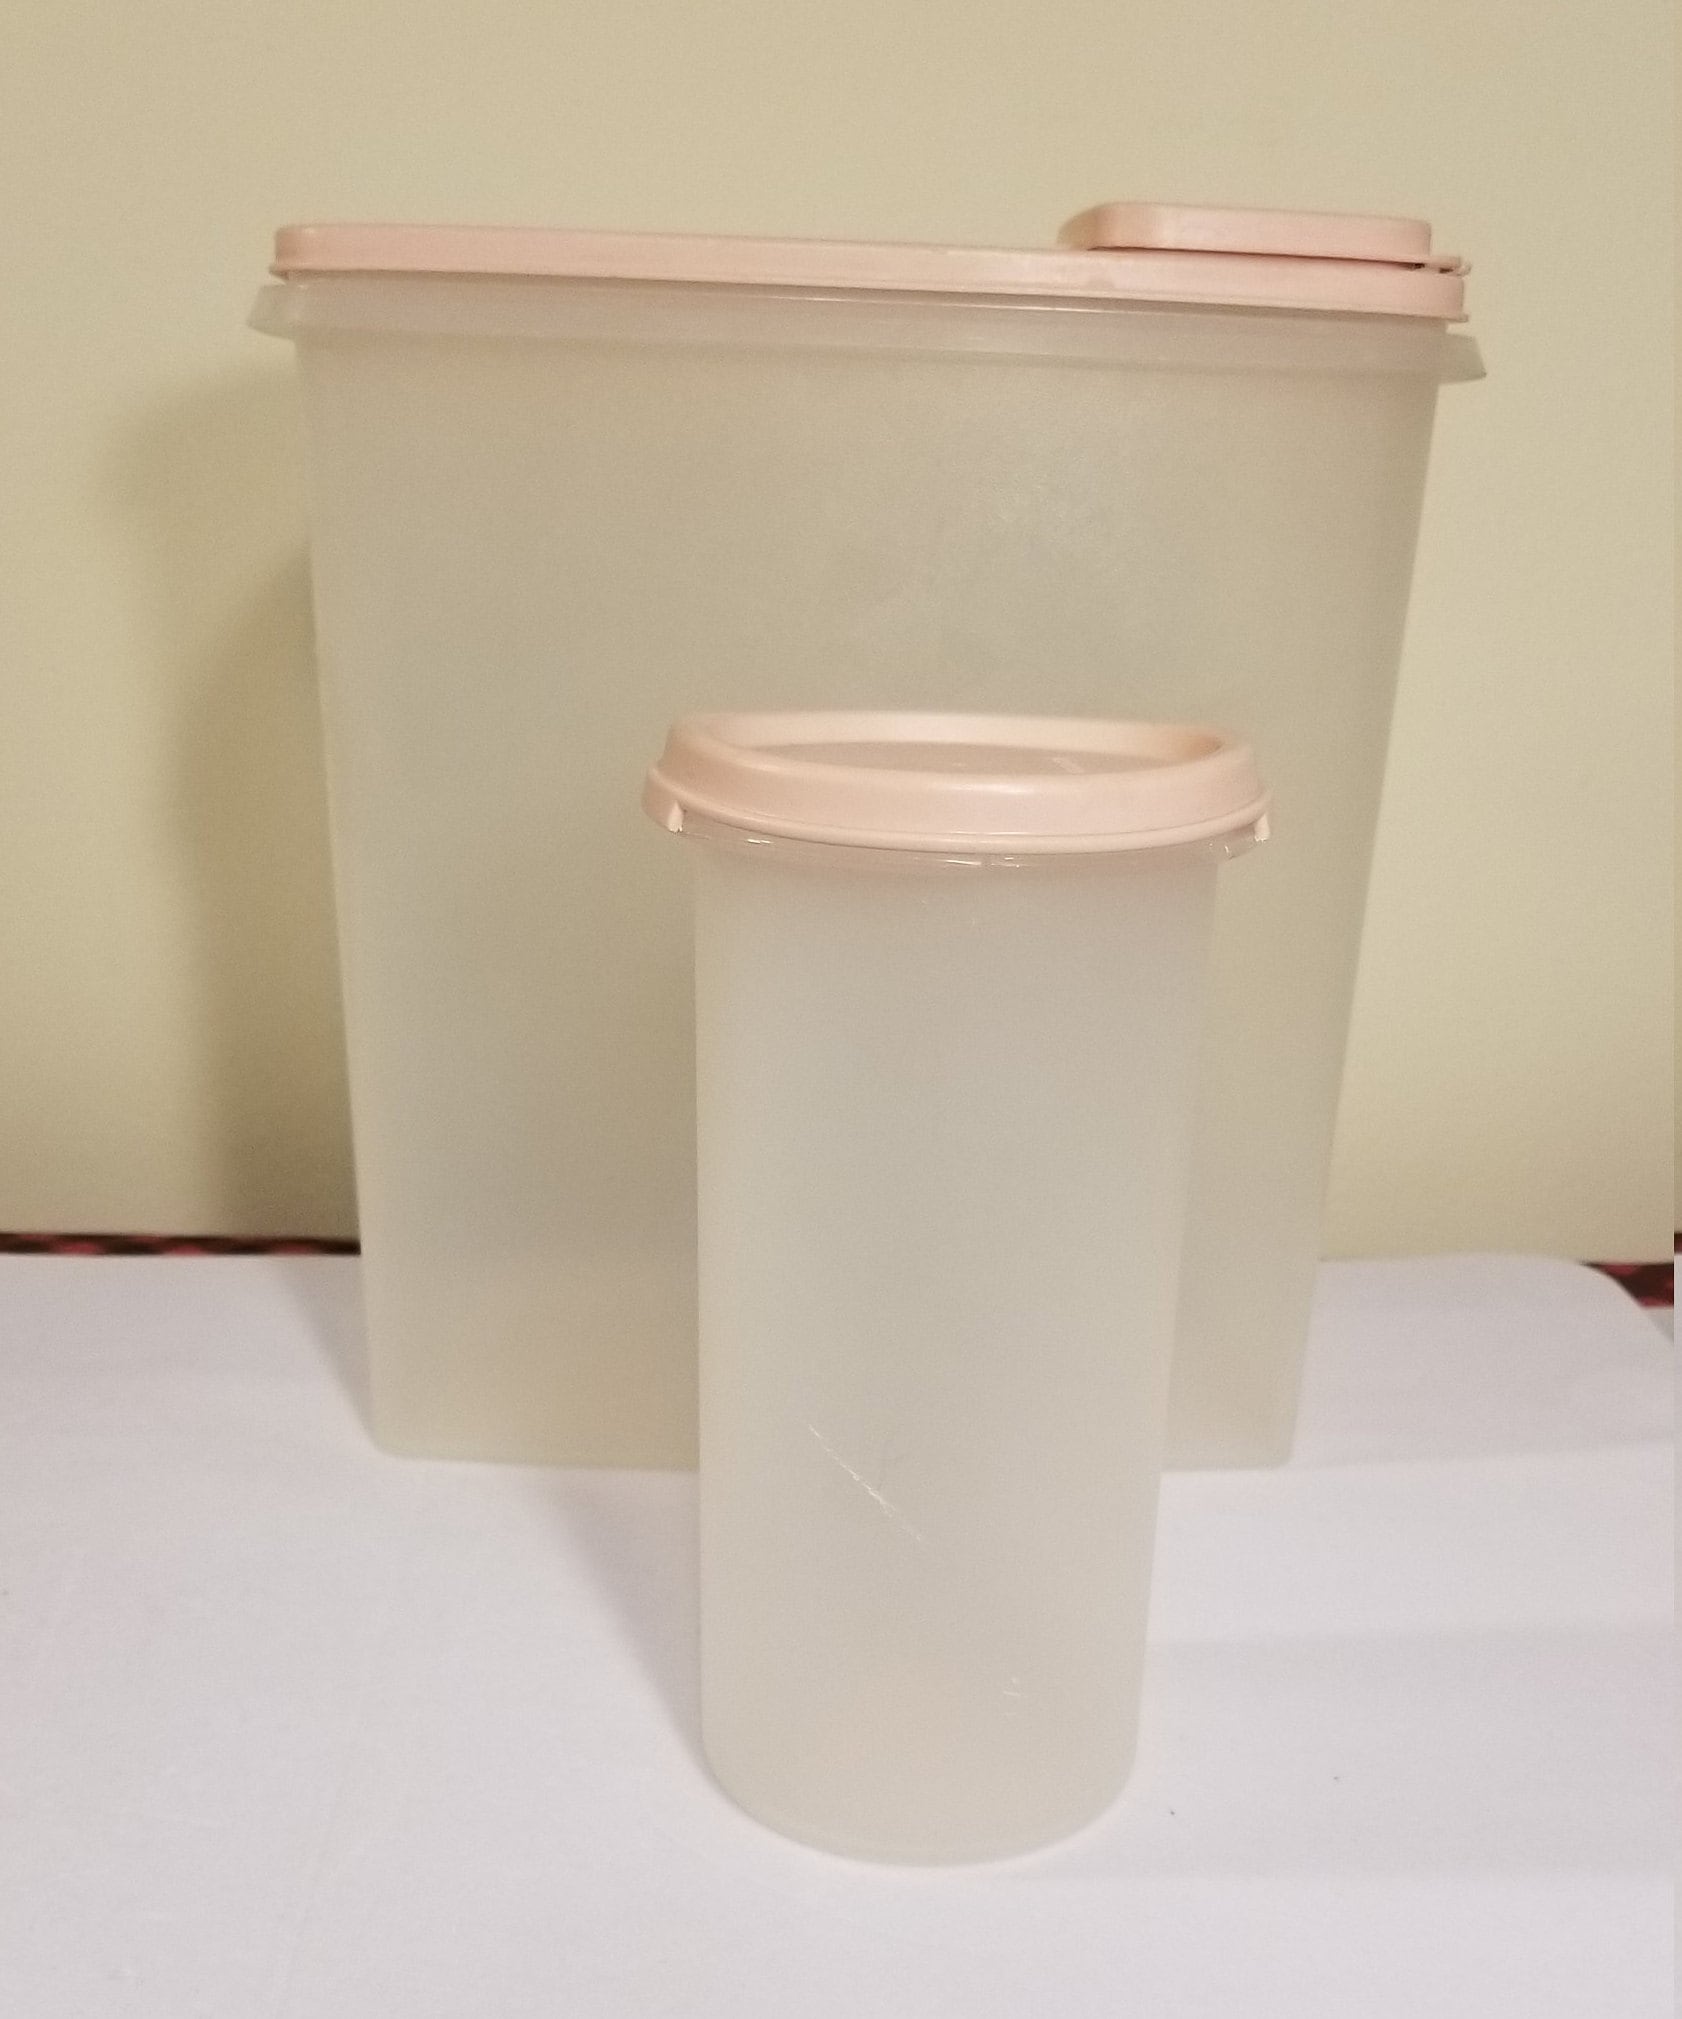 Vintage Pink Tupperware, Set of 5 Round or Oblong Containers, Cereal  Container